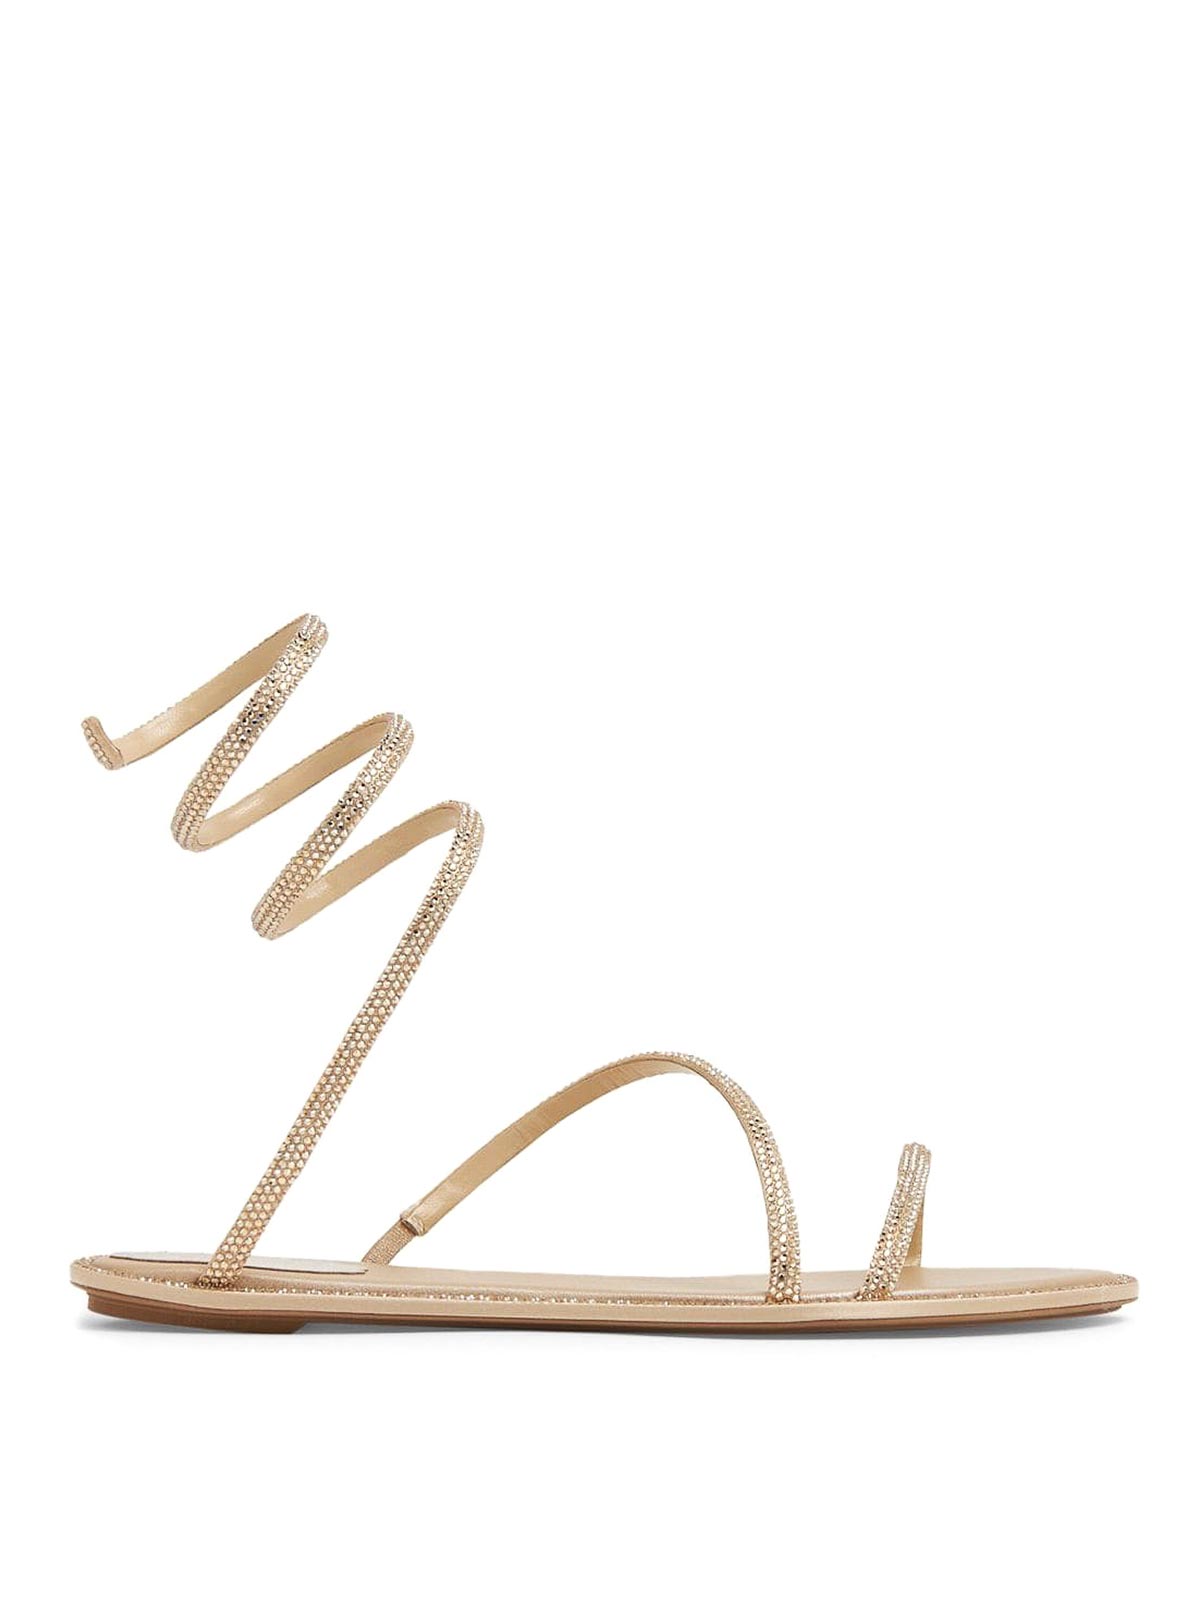 René Caovilla Cleo Sandals In Beis